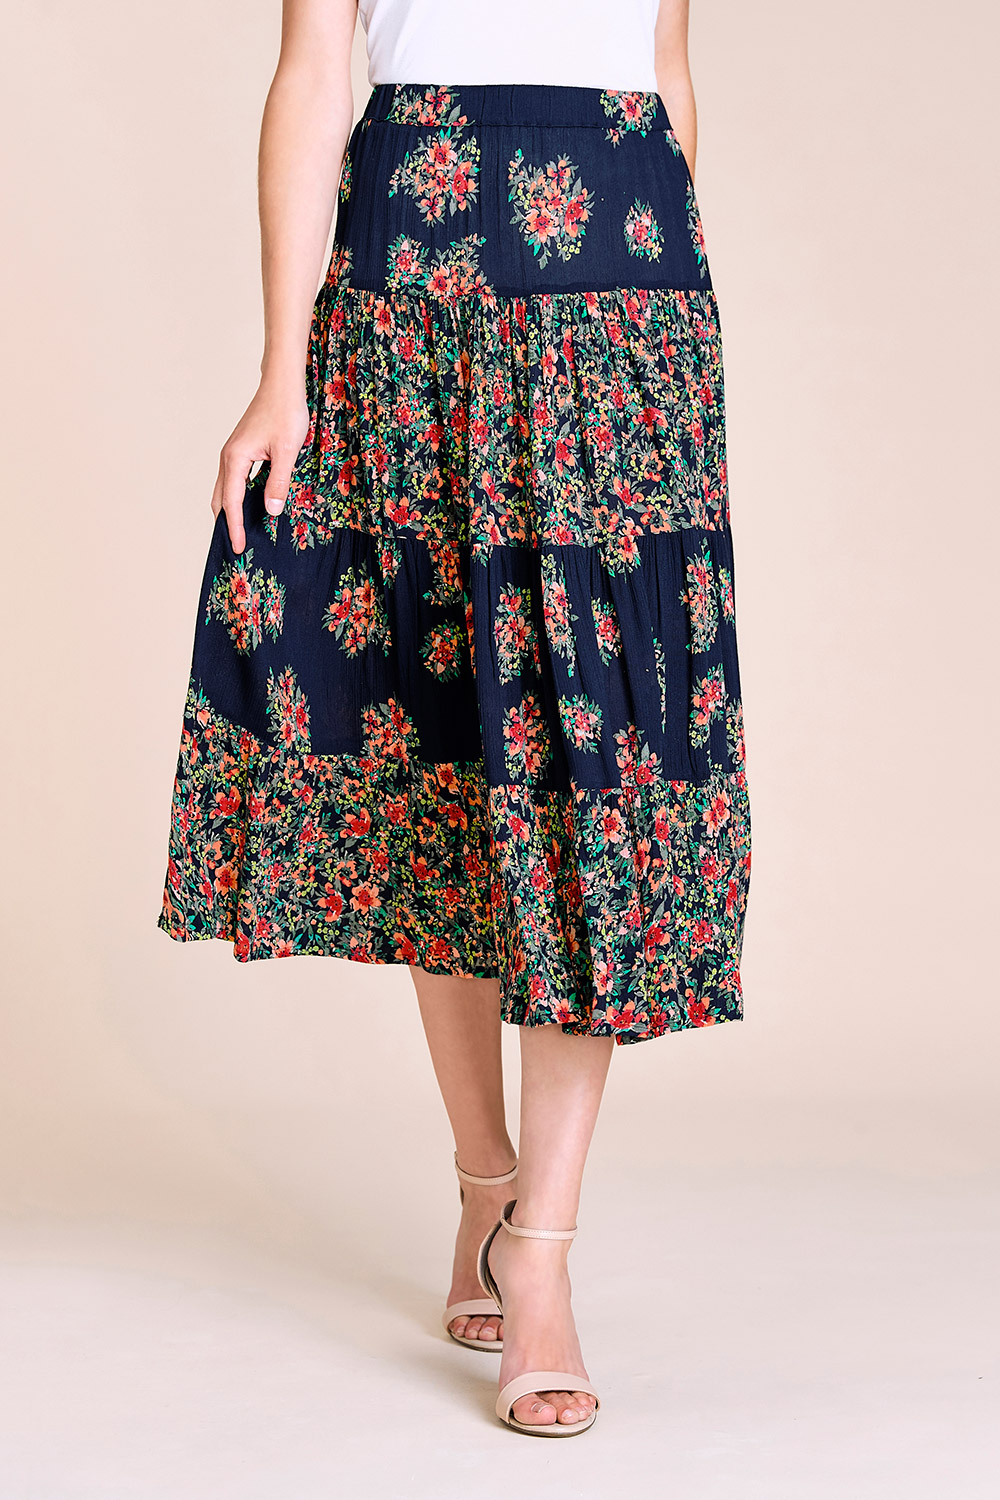 Buy Printed Crinkle Tiered Skirt | Home Delivery | Bonmarché